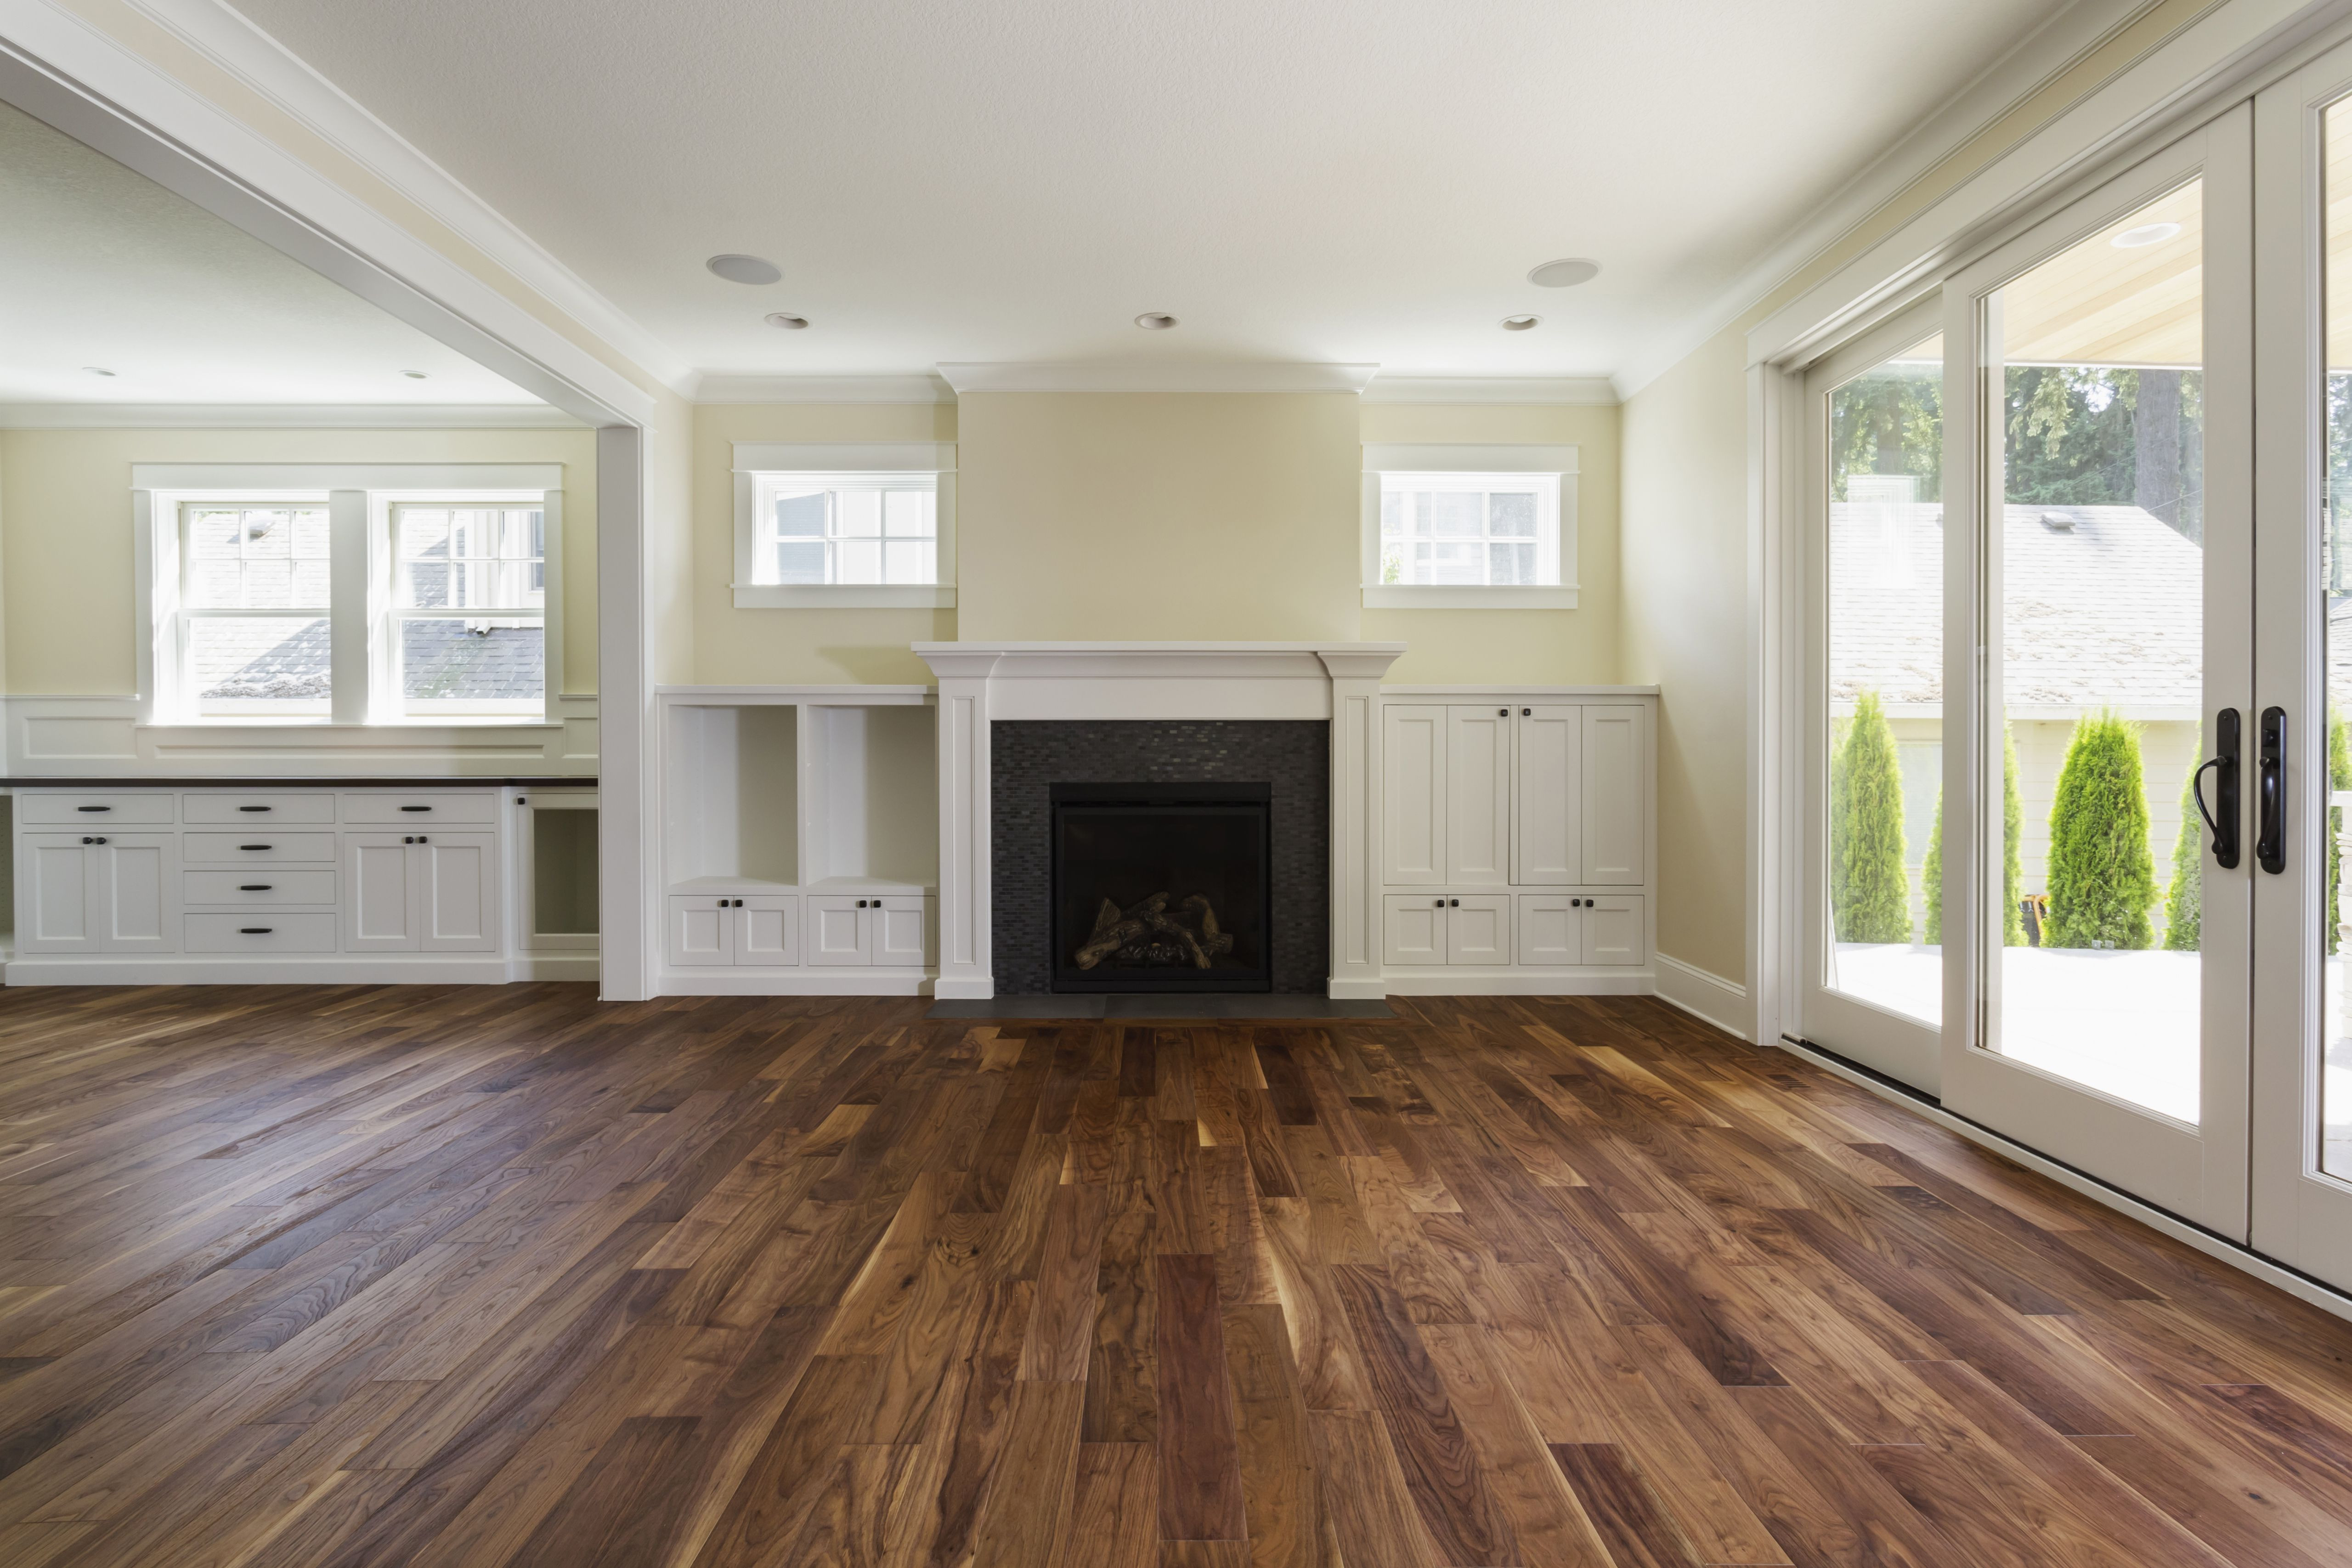 21 Fashionable the Hardwood Flooring Store 2024 free download the hardwood flooring store of the pros and cons of prefinished hardwood flooring intended for fireplace and built in shelves in living room 482143011 57bef8e33df78cc16e035397